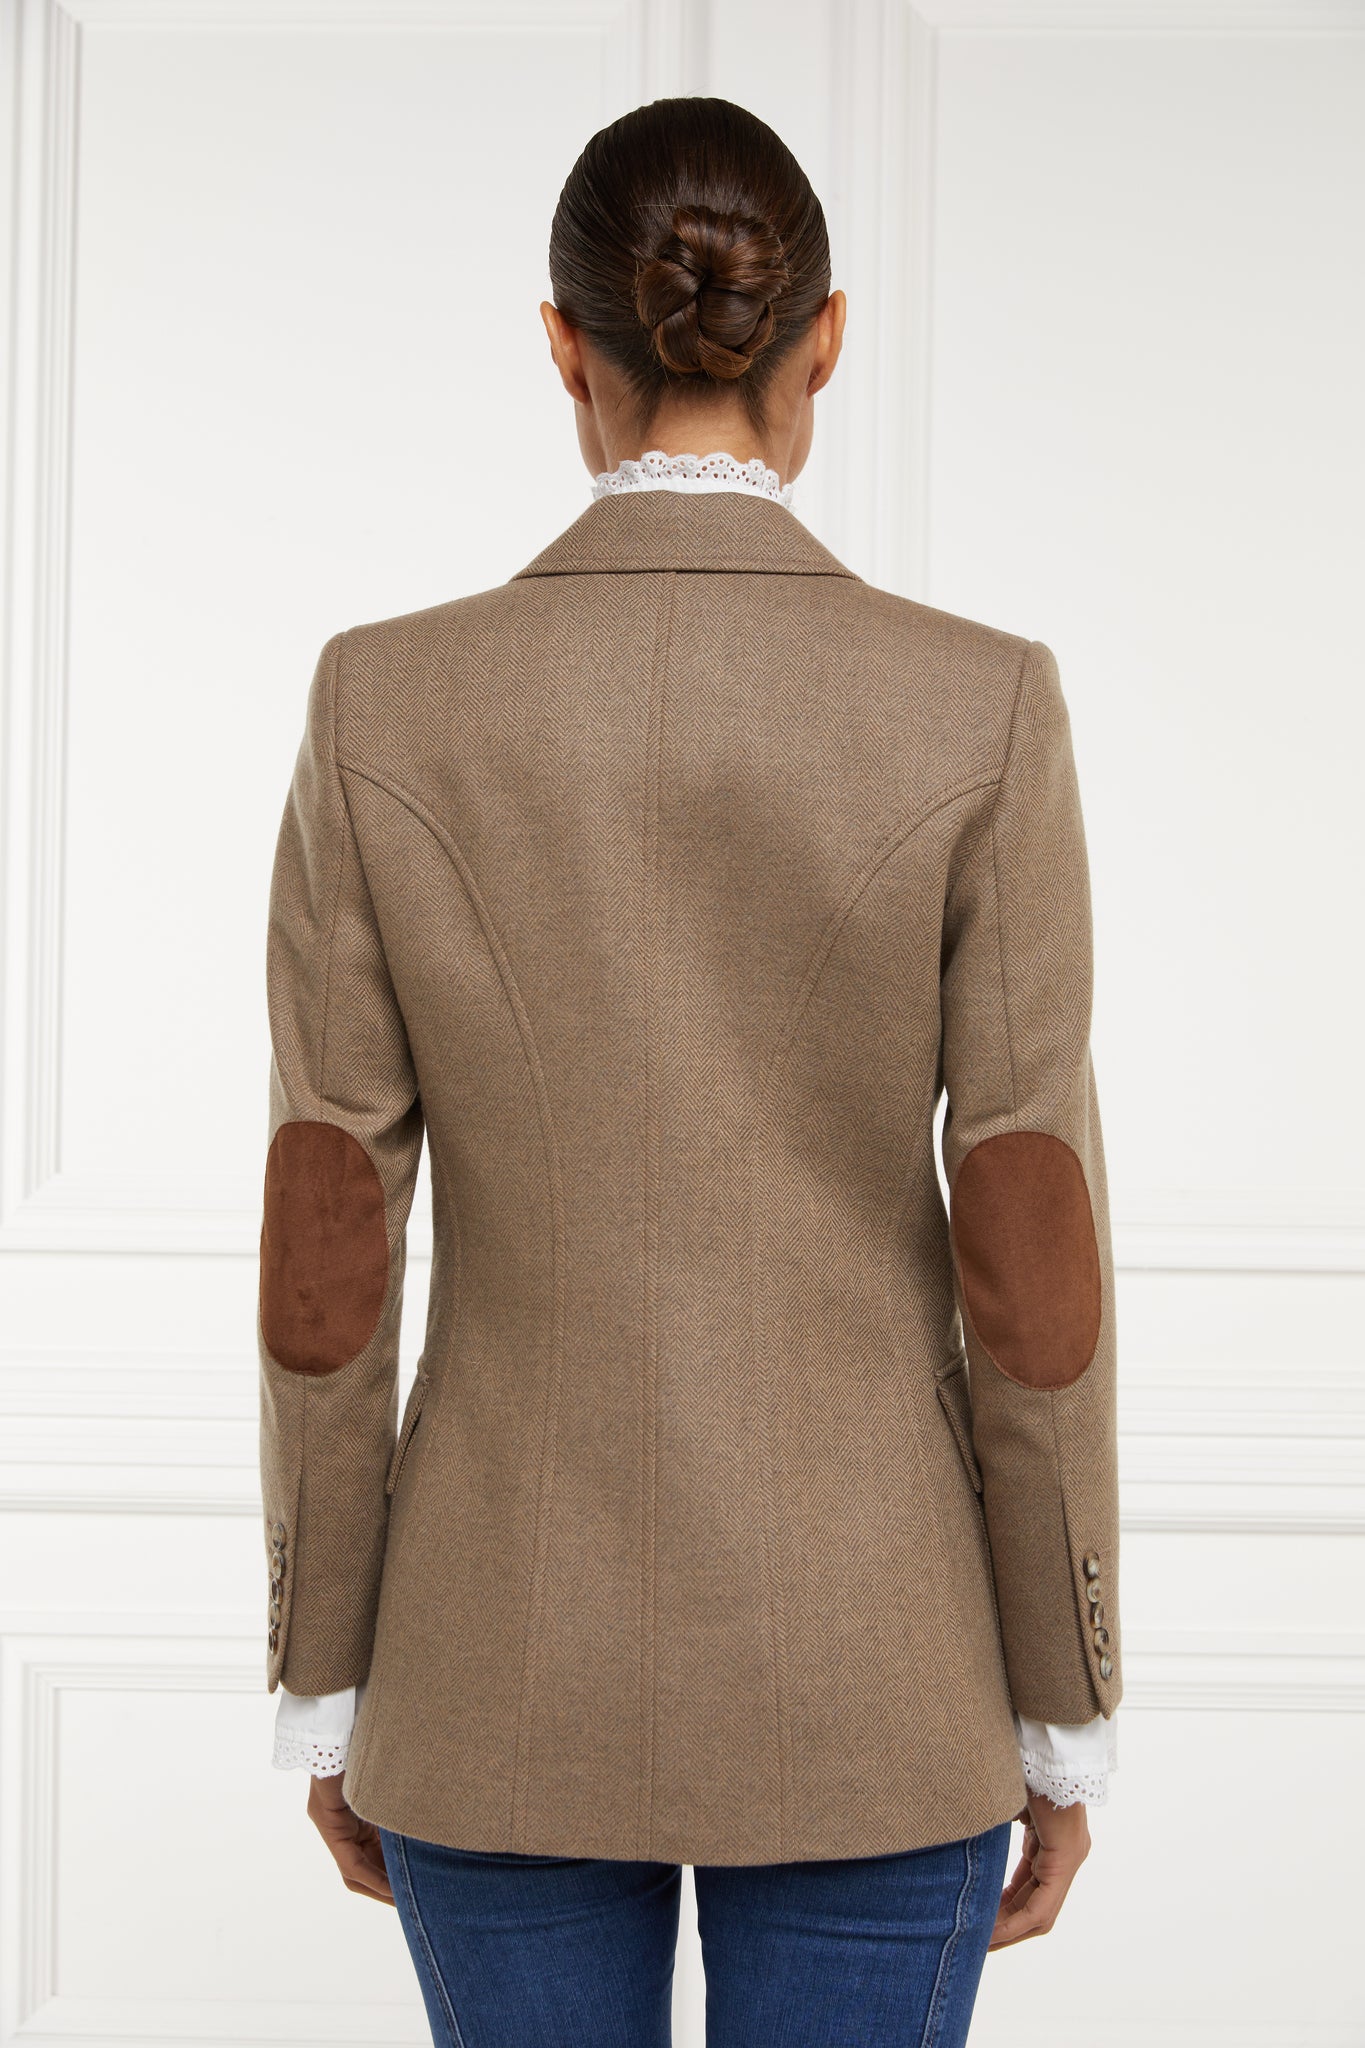 back of womens tailored fit single breasted blazer in camel herringbone with patch pockets and contrast tan suede elbow patches and underside collar